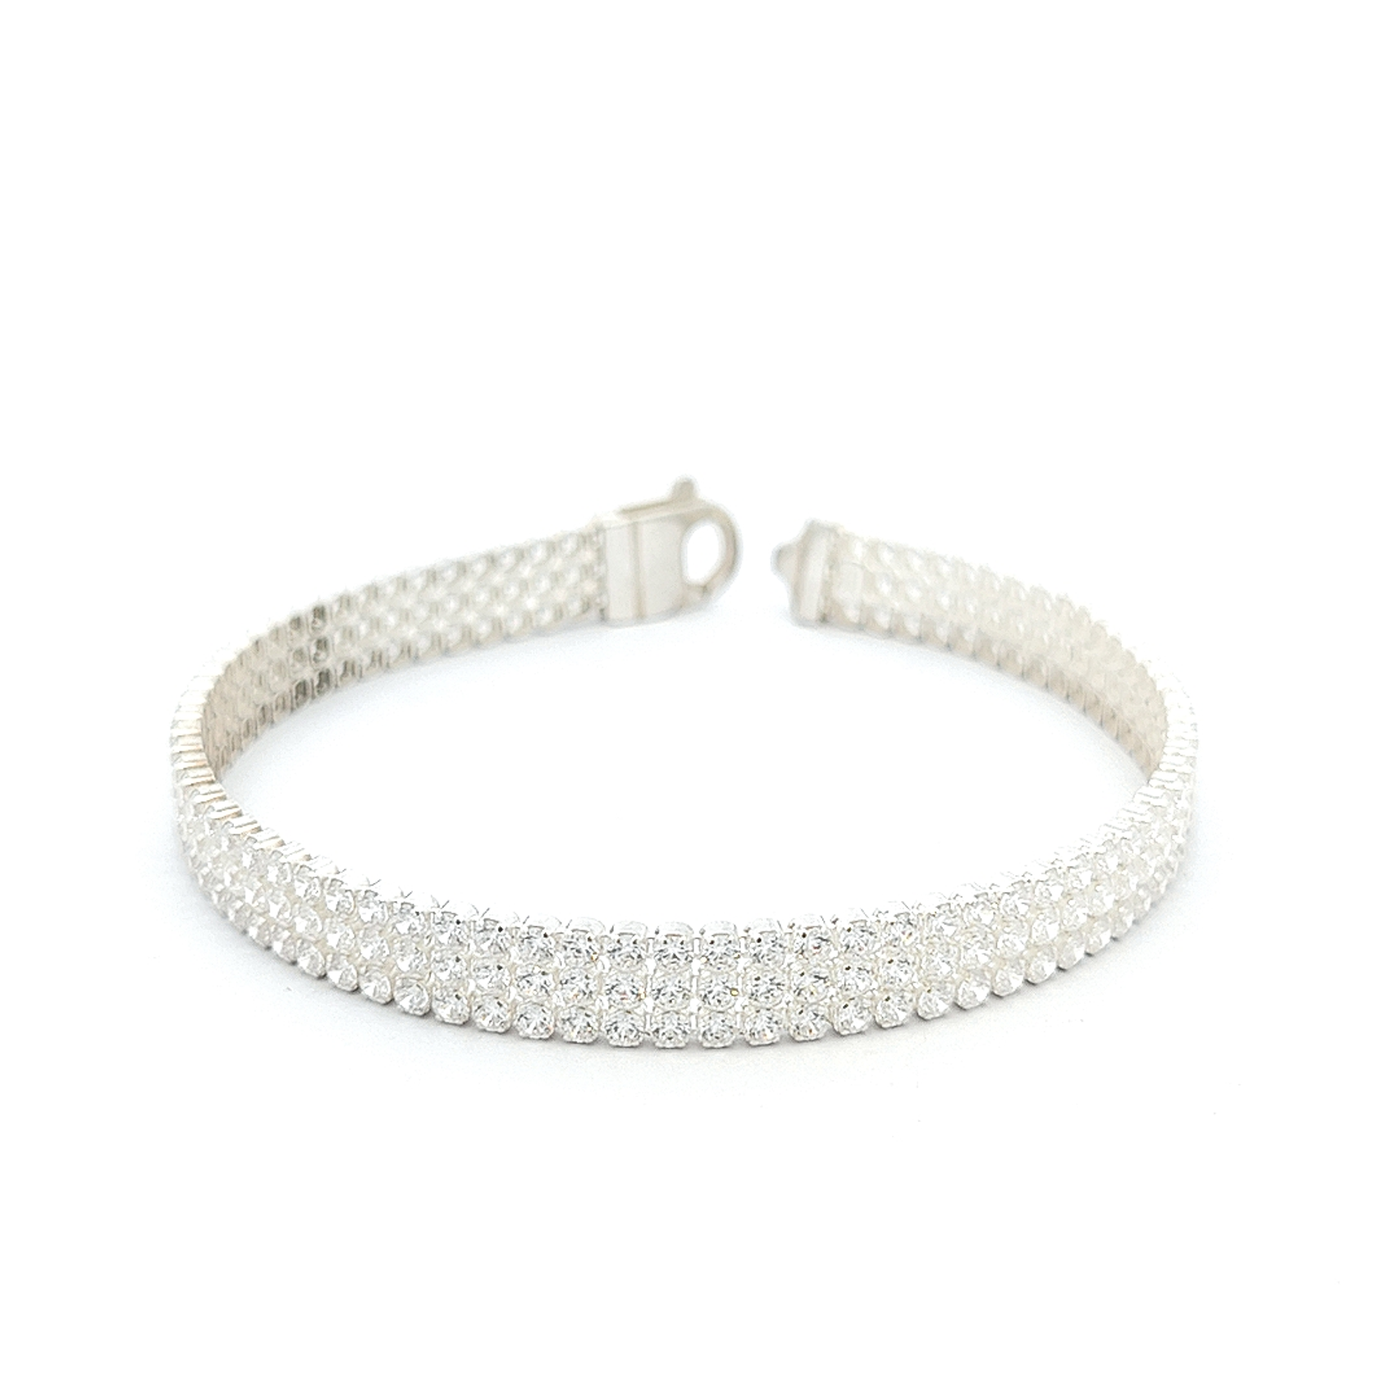 White Cubic Zirconia and Sterling Silver Triple Strand Tennis Bracelet - boothandbooth